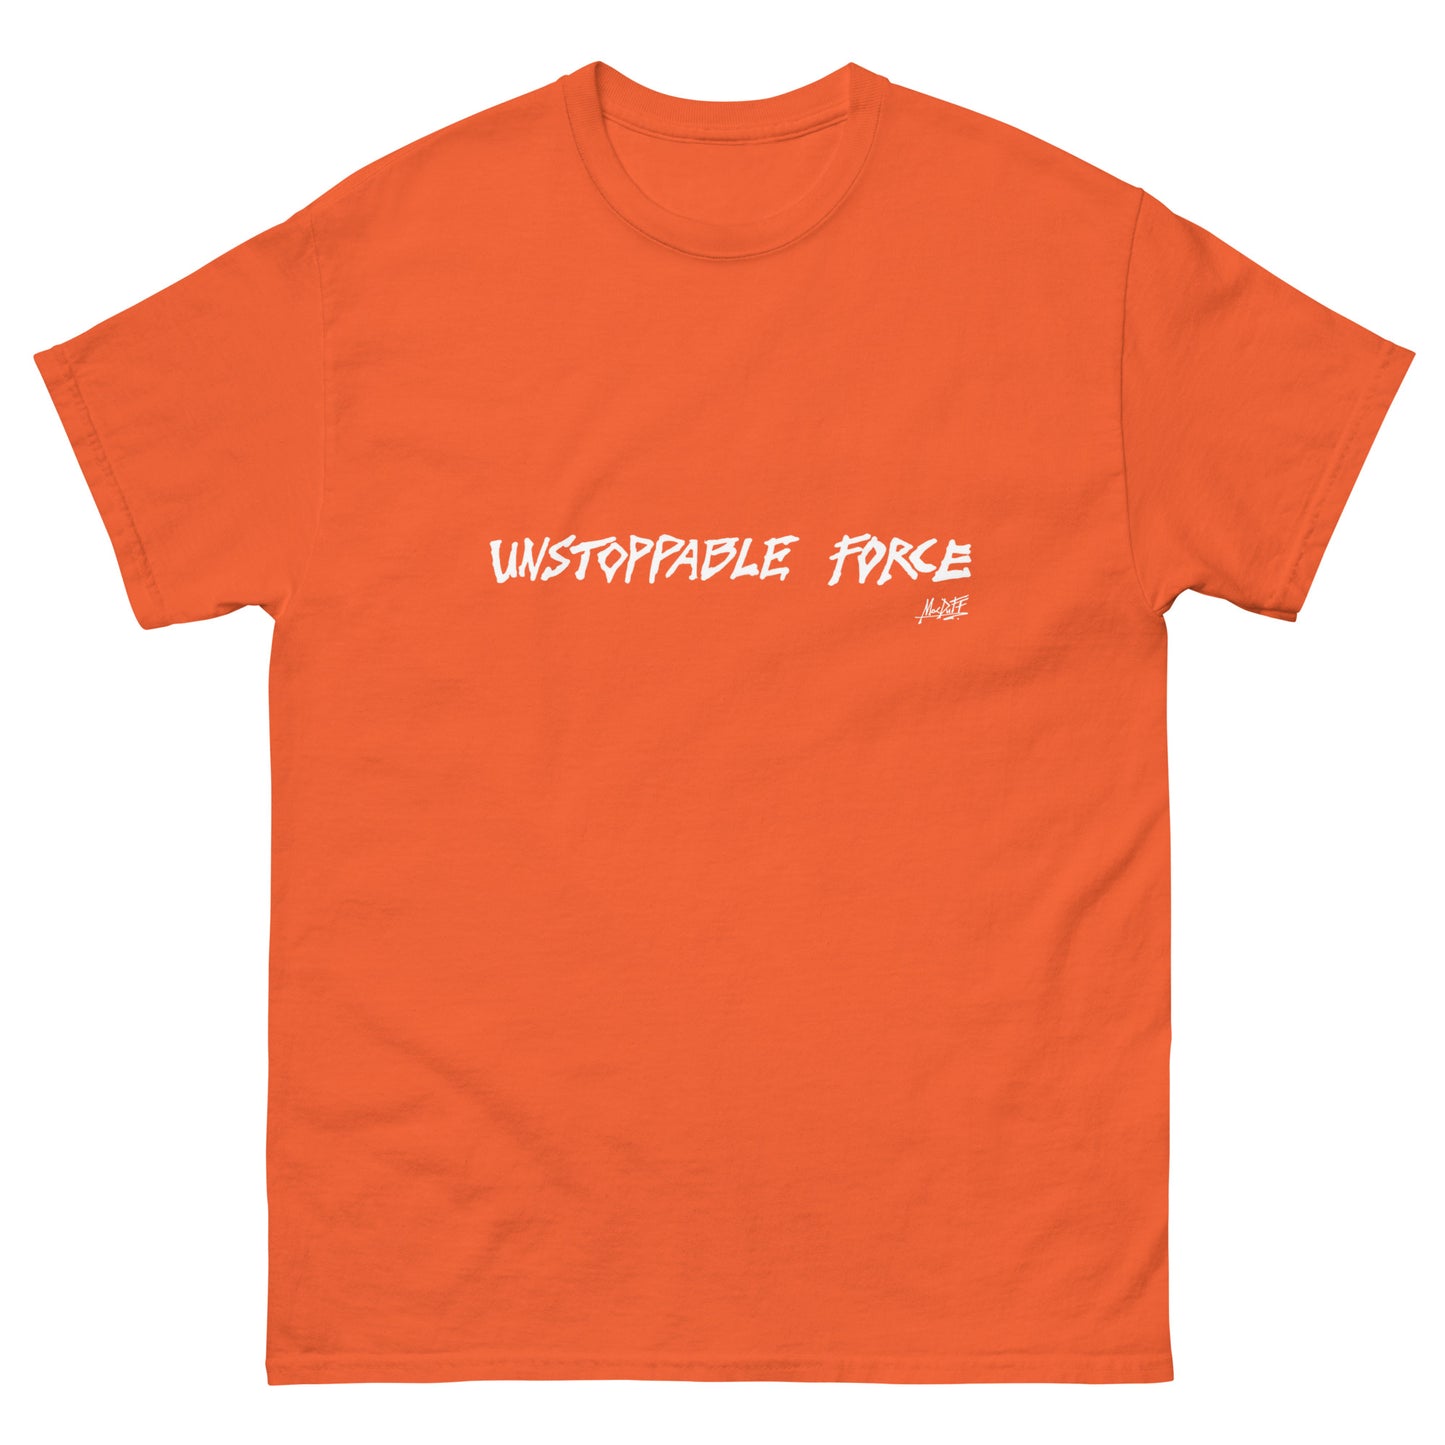 The Unstoppable Force T